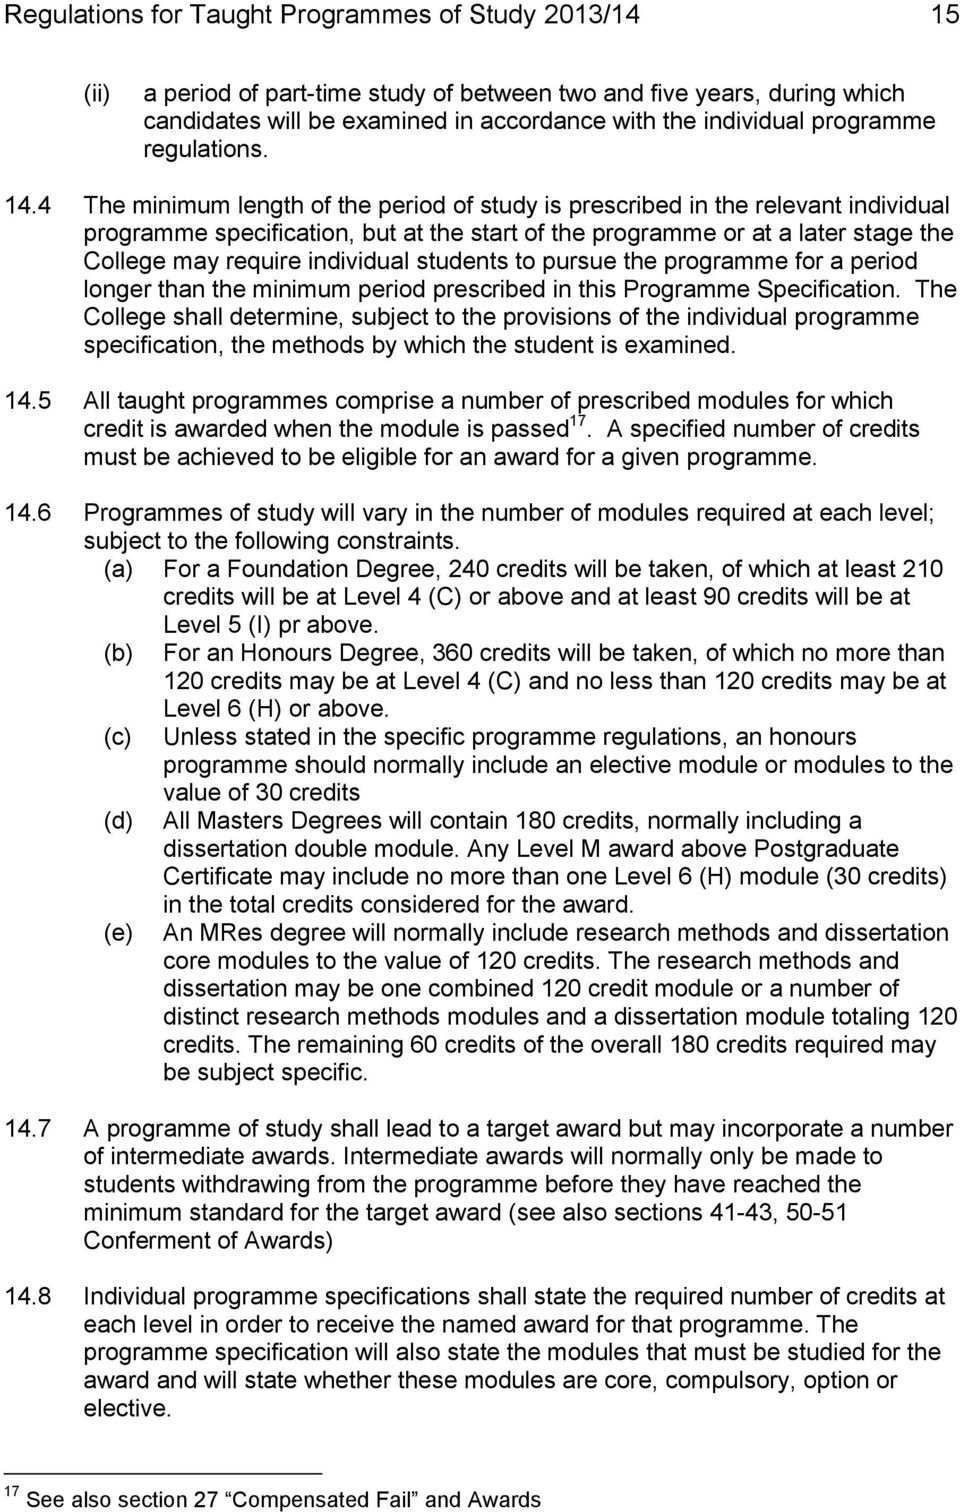 4 The minimum length of the period of study is prescribed in the relevant individual programme specification, but at the start of the programme or at a later stage the College may require individual